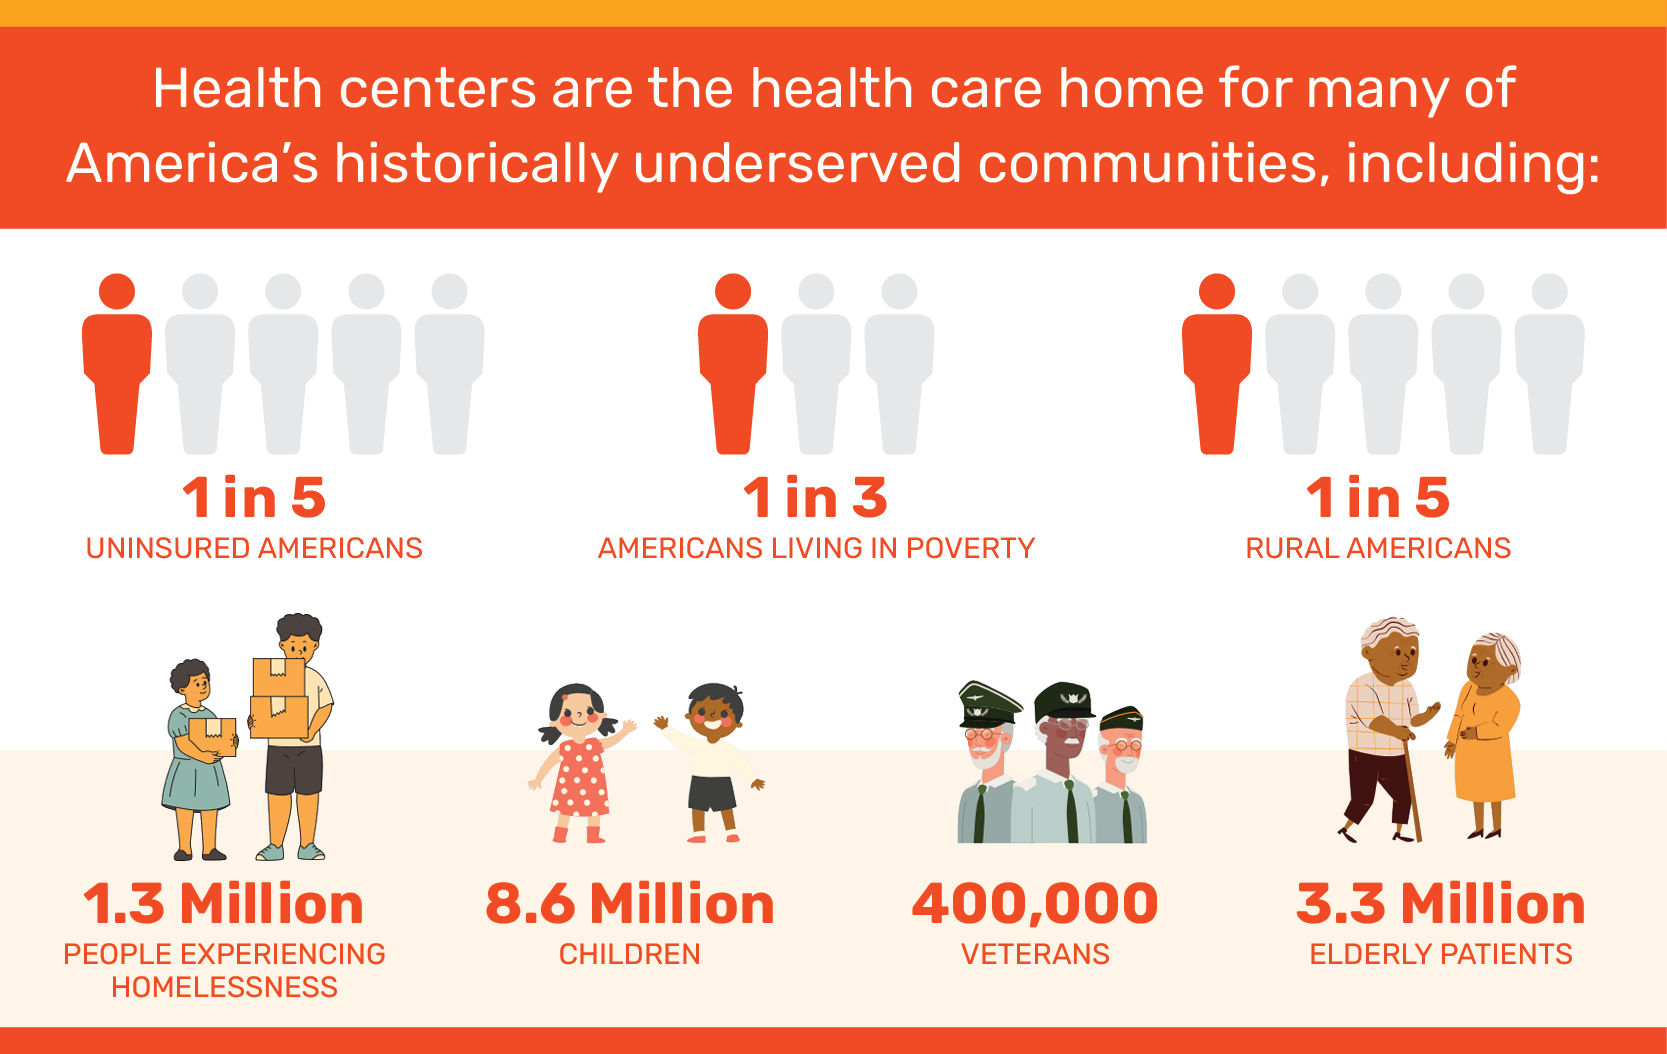 Health centers are the health care home for many of America's historically underserved communities.